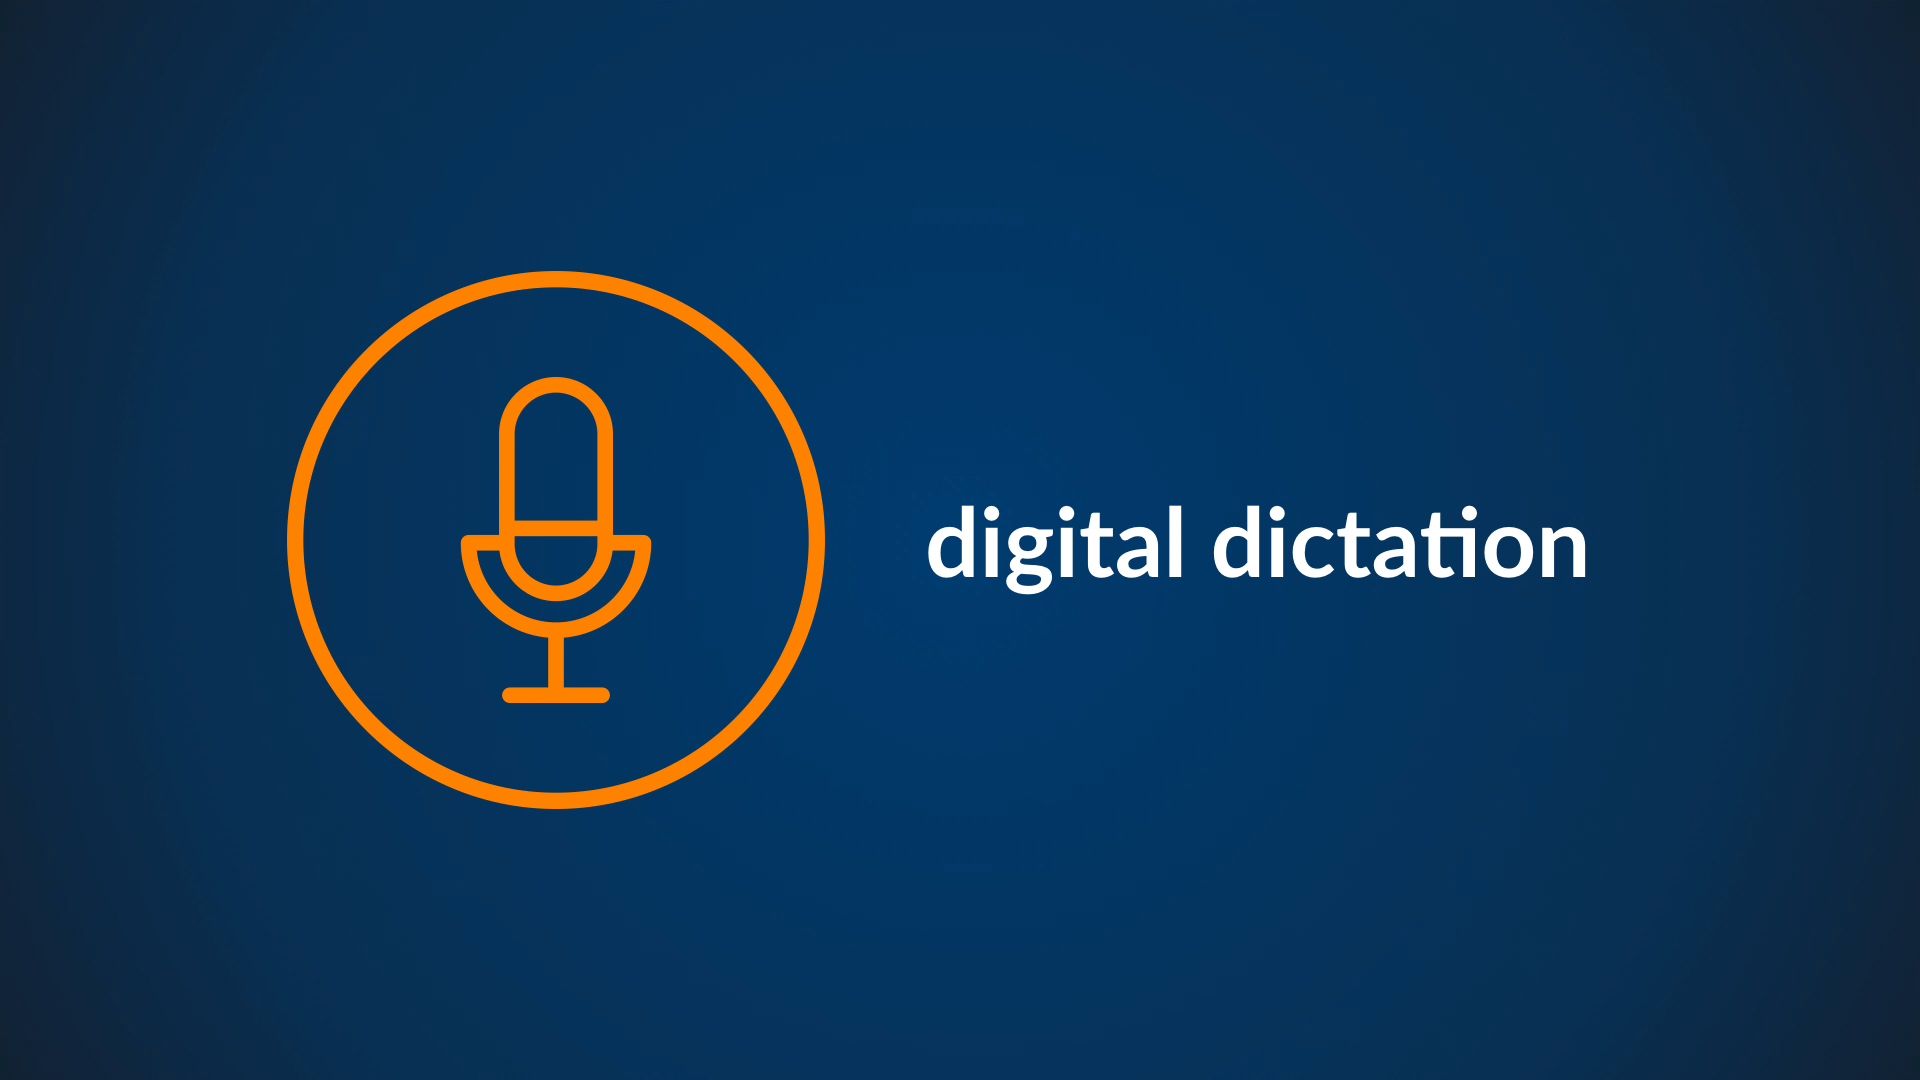 Top 3 Reasons to Invest in Digital Dictation